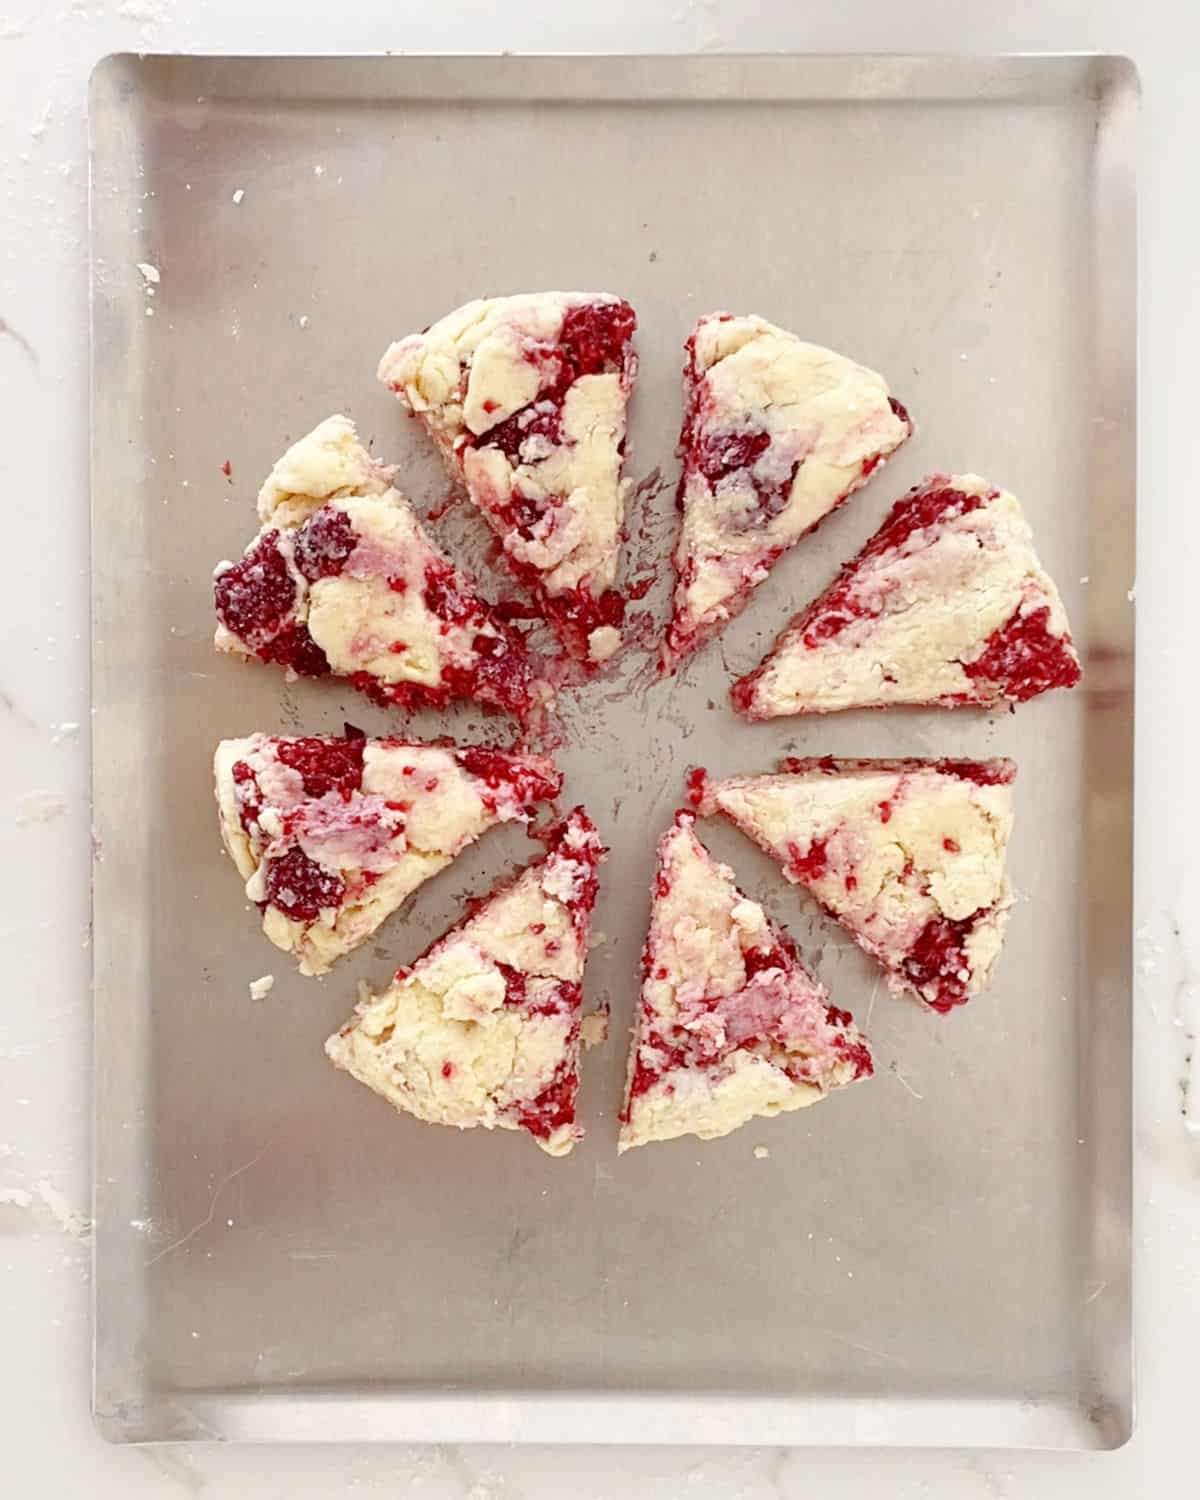 Eight raspberry scone triangles on a baking sheet. Top view.